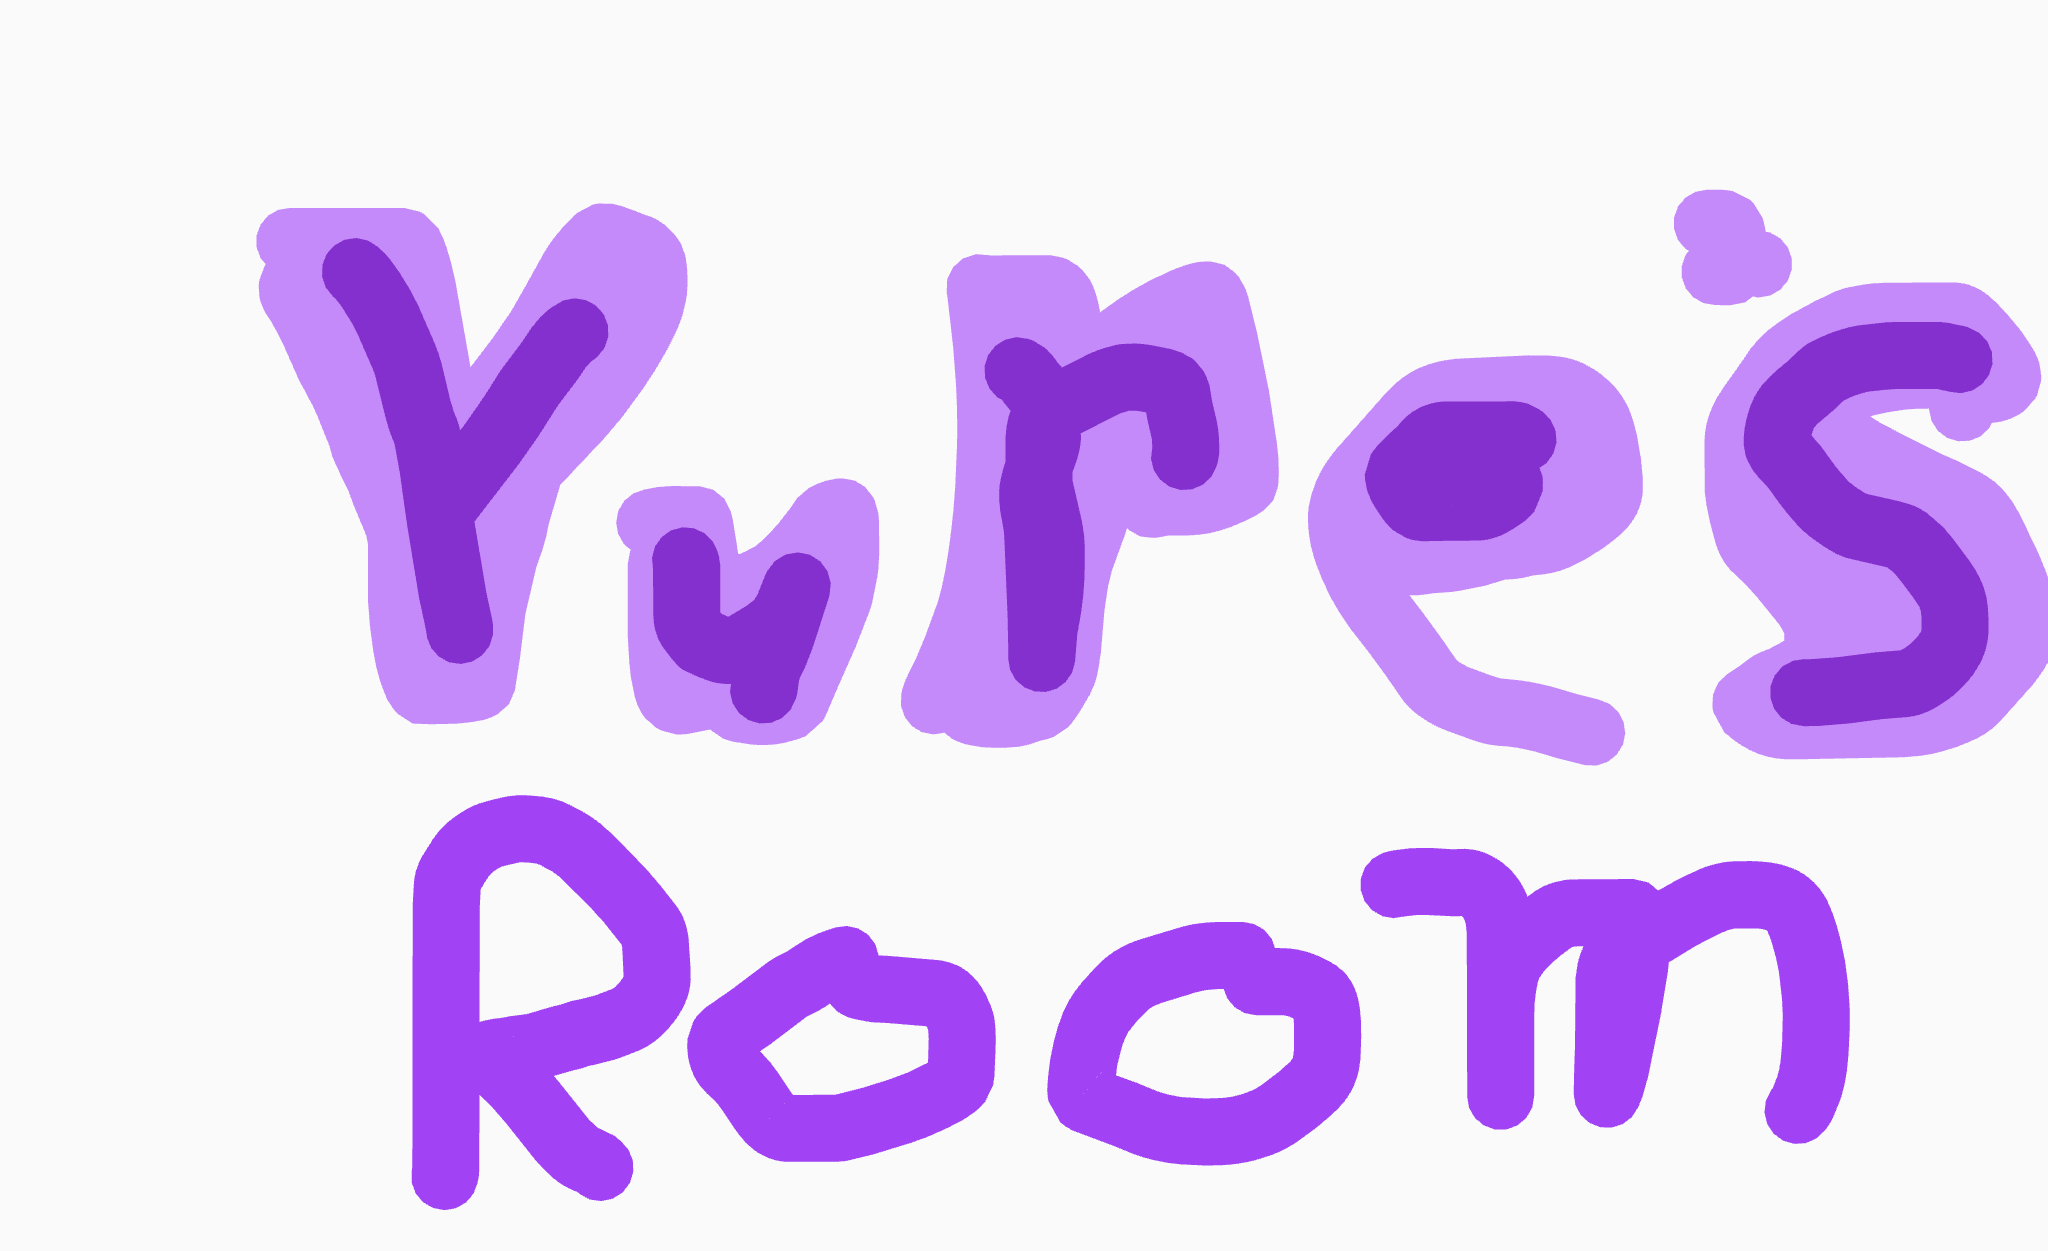 https://static.wikia.nocookie.net/treehousetv/images/a/af/Yure%27s_Room_Logo.png/revision/latest?cb=20220625171912